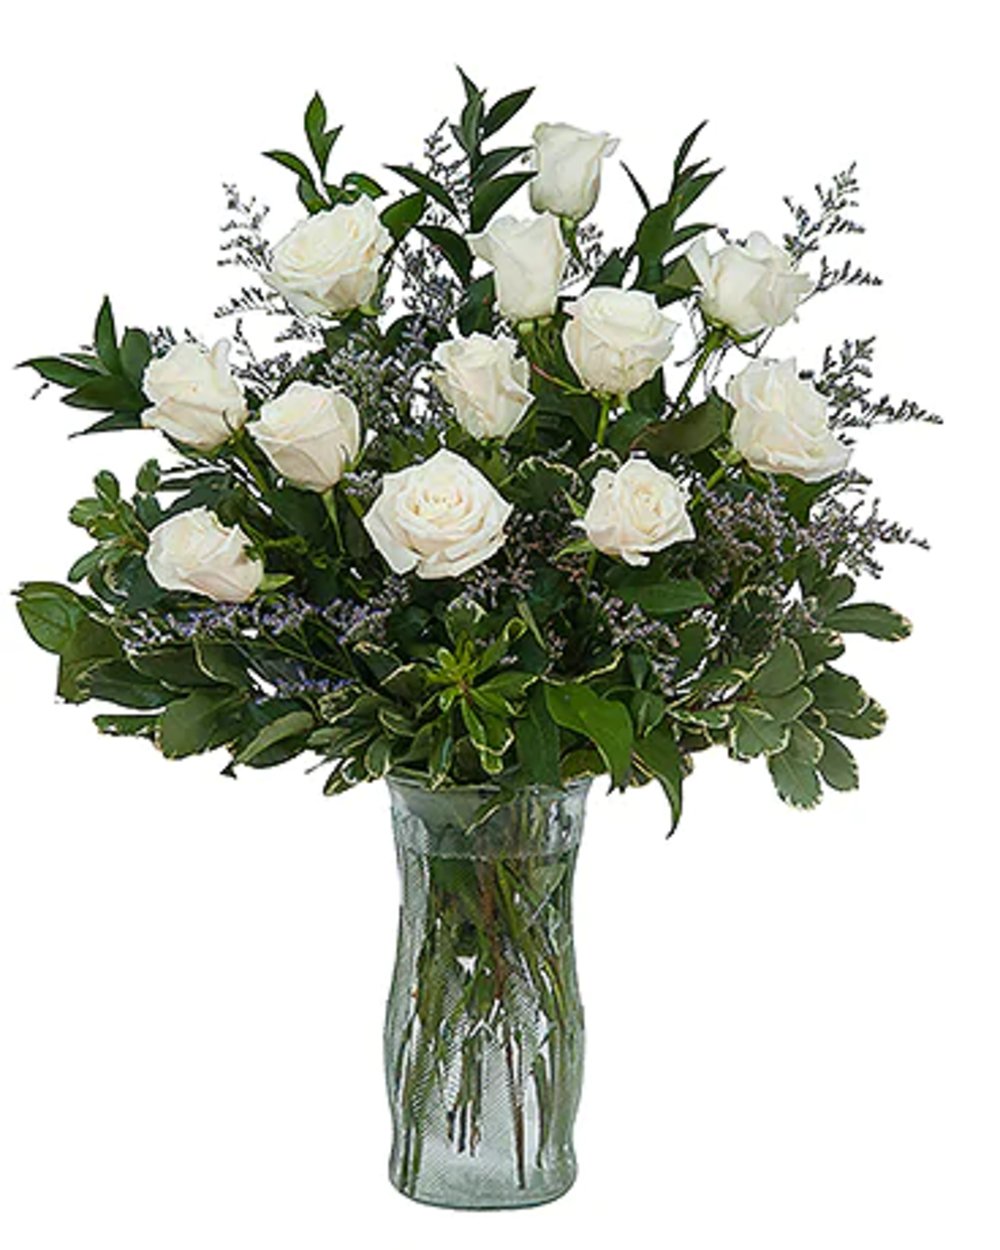 Vase with 10 Stems of White Roses & greens